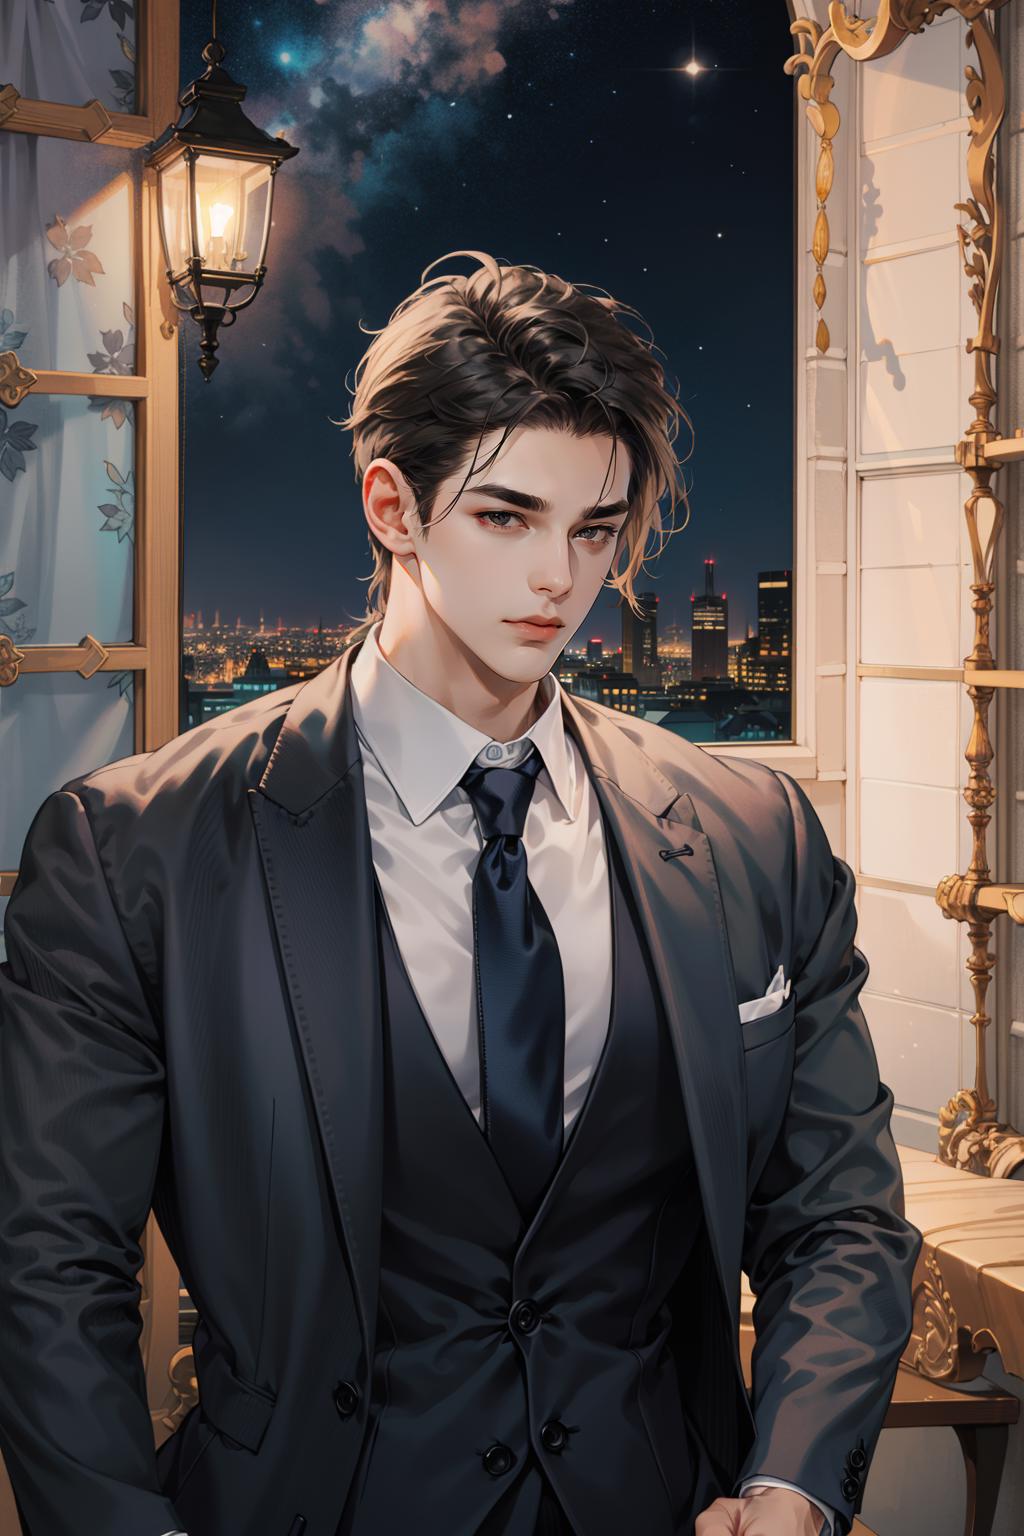 Anime Man In Suit PNG Image | Transparent PNG Free Download on SeekPNG